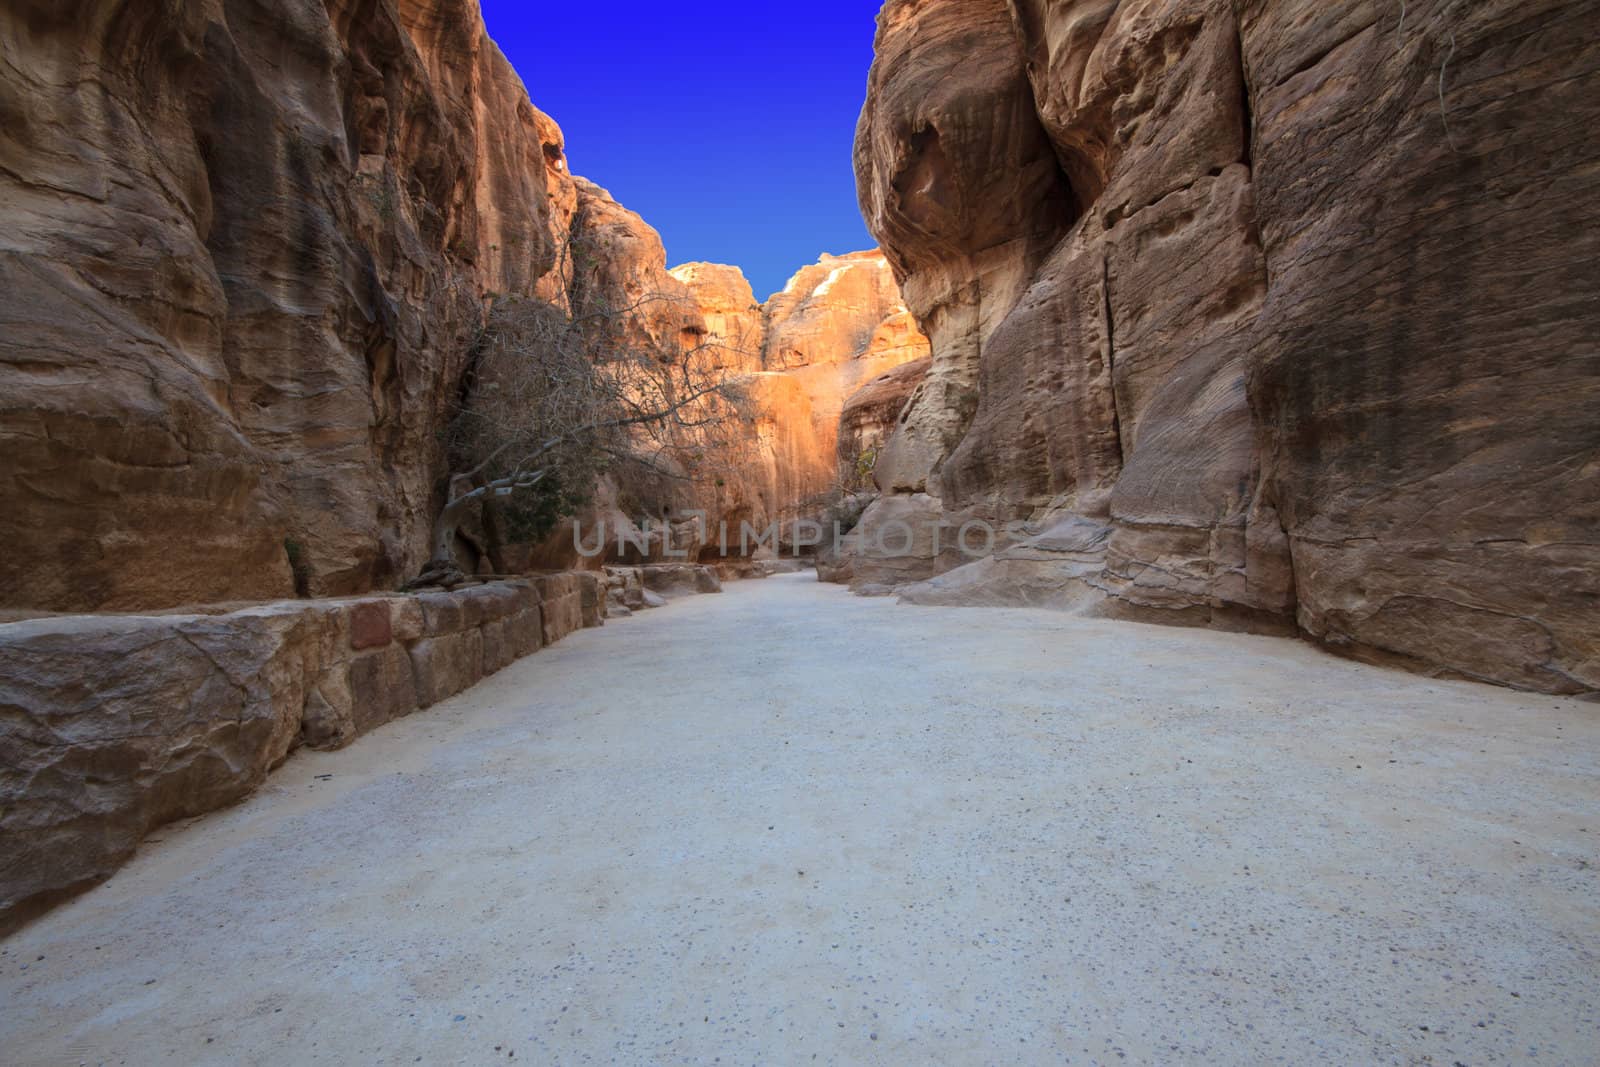 As-Siq Petra, Lost rock city of Jordan.  UNESCO world heritage site and one of The New 7 Wonders of the World.